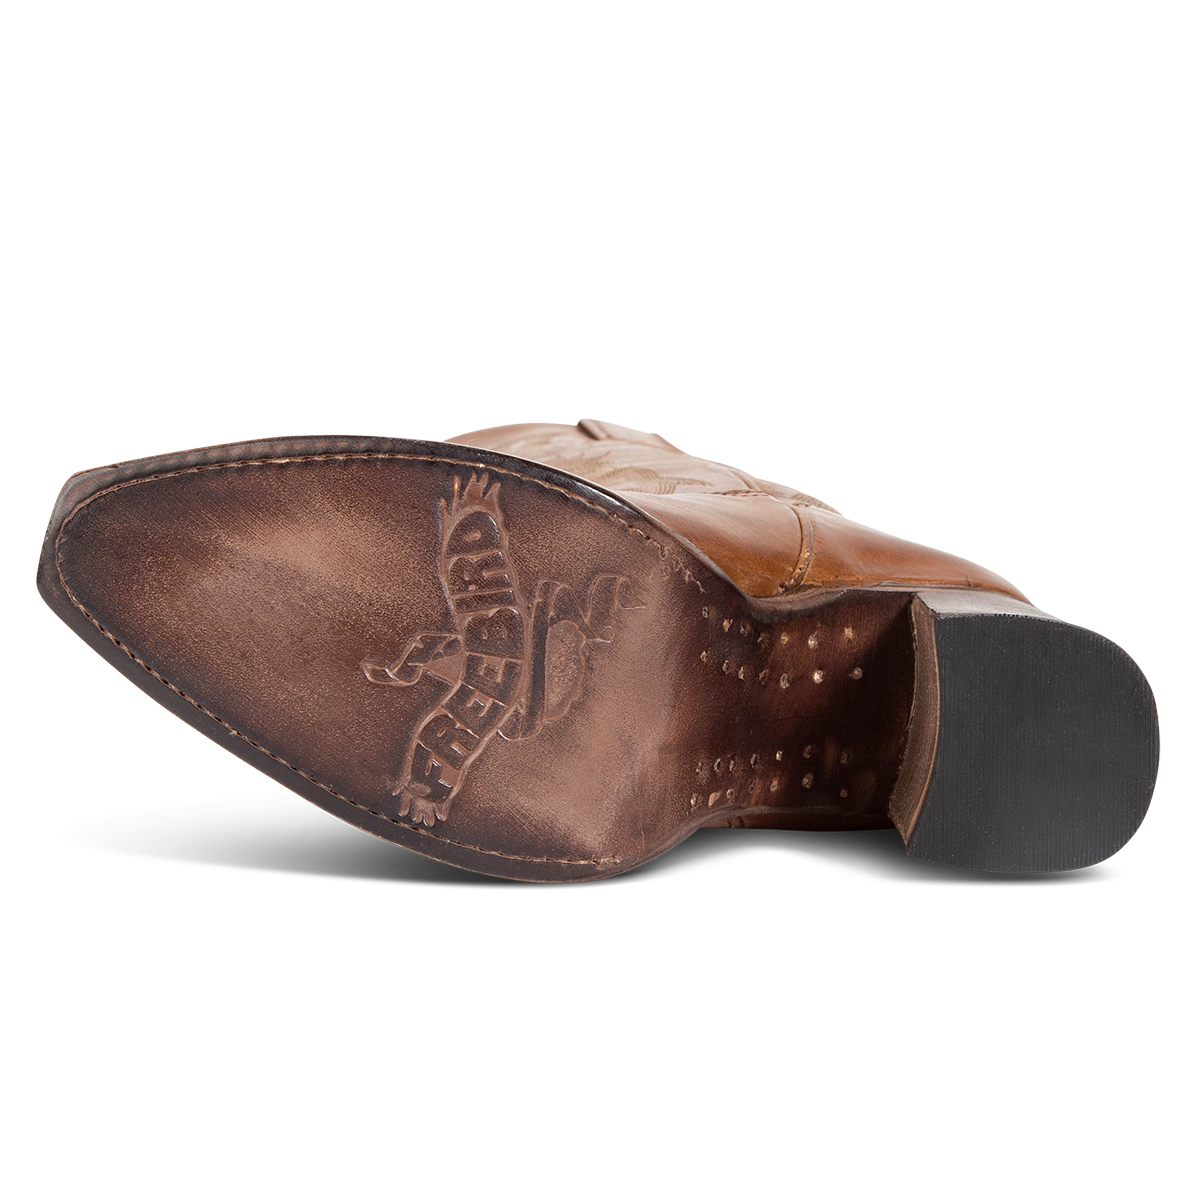 Leather sole imprinted with FREEBIRD on women's Jackson tan leather high heel western boot